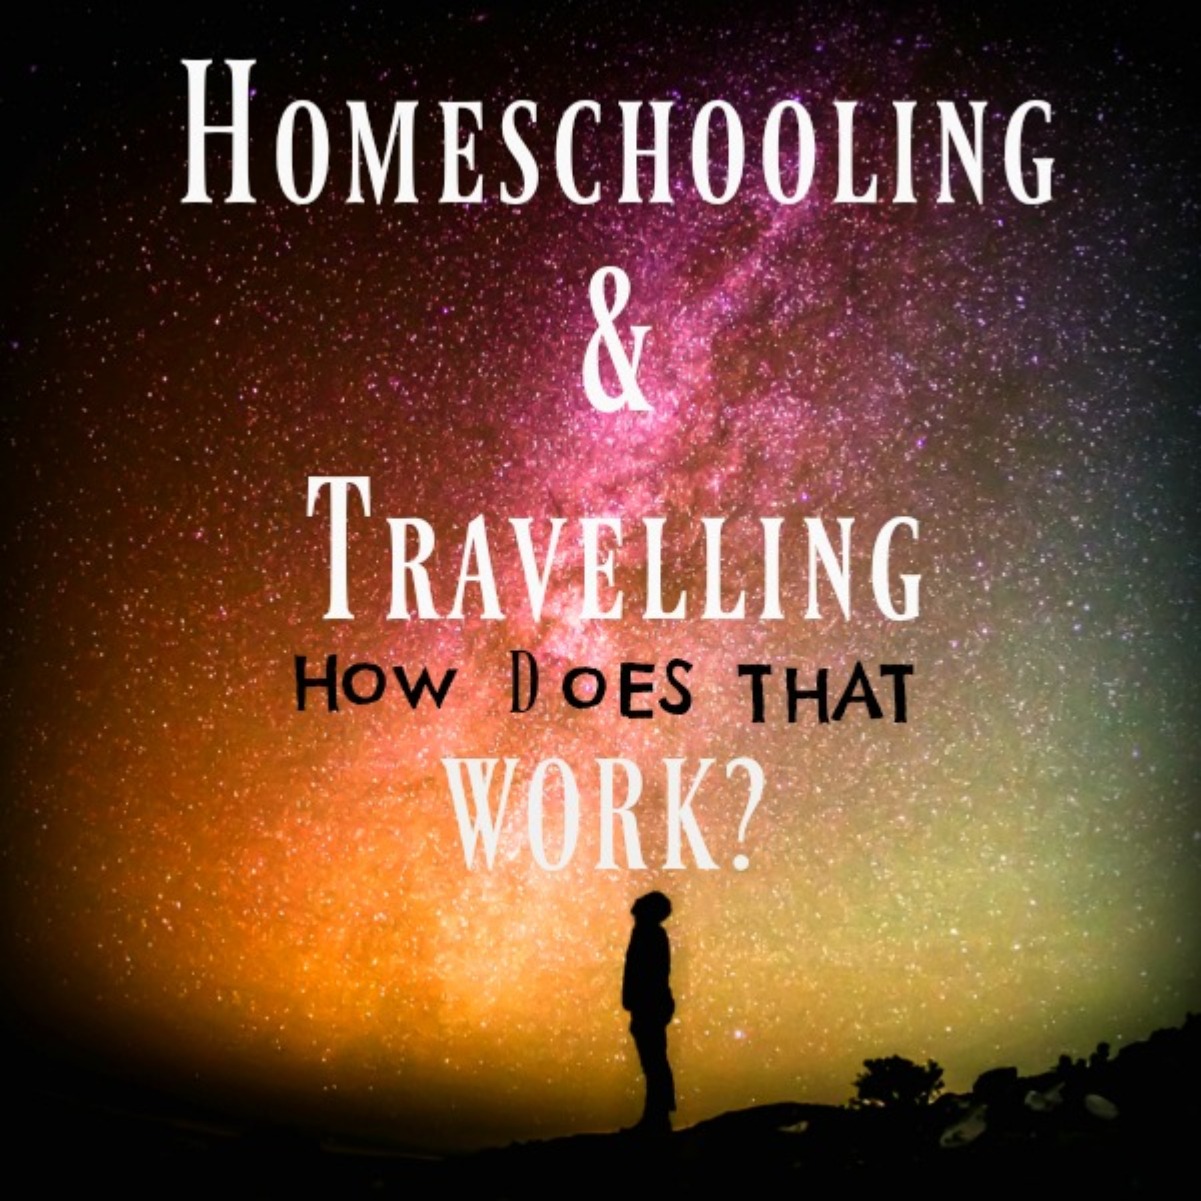 homeschooling and travelling